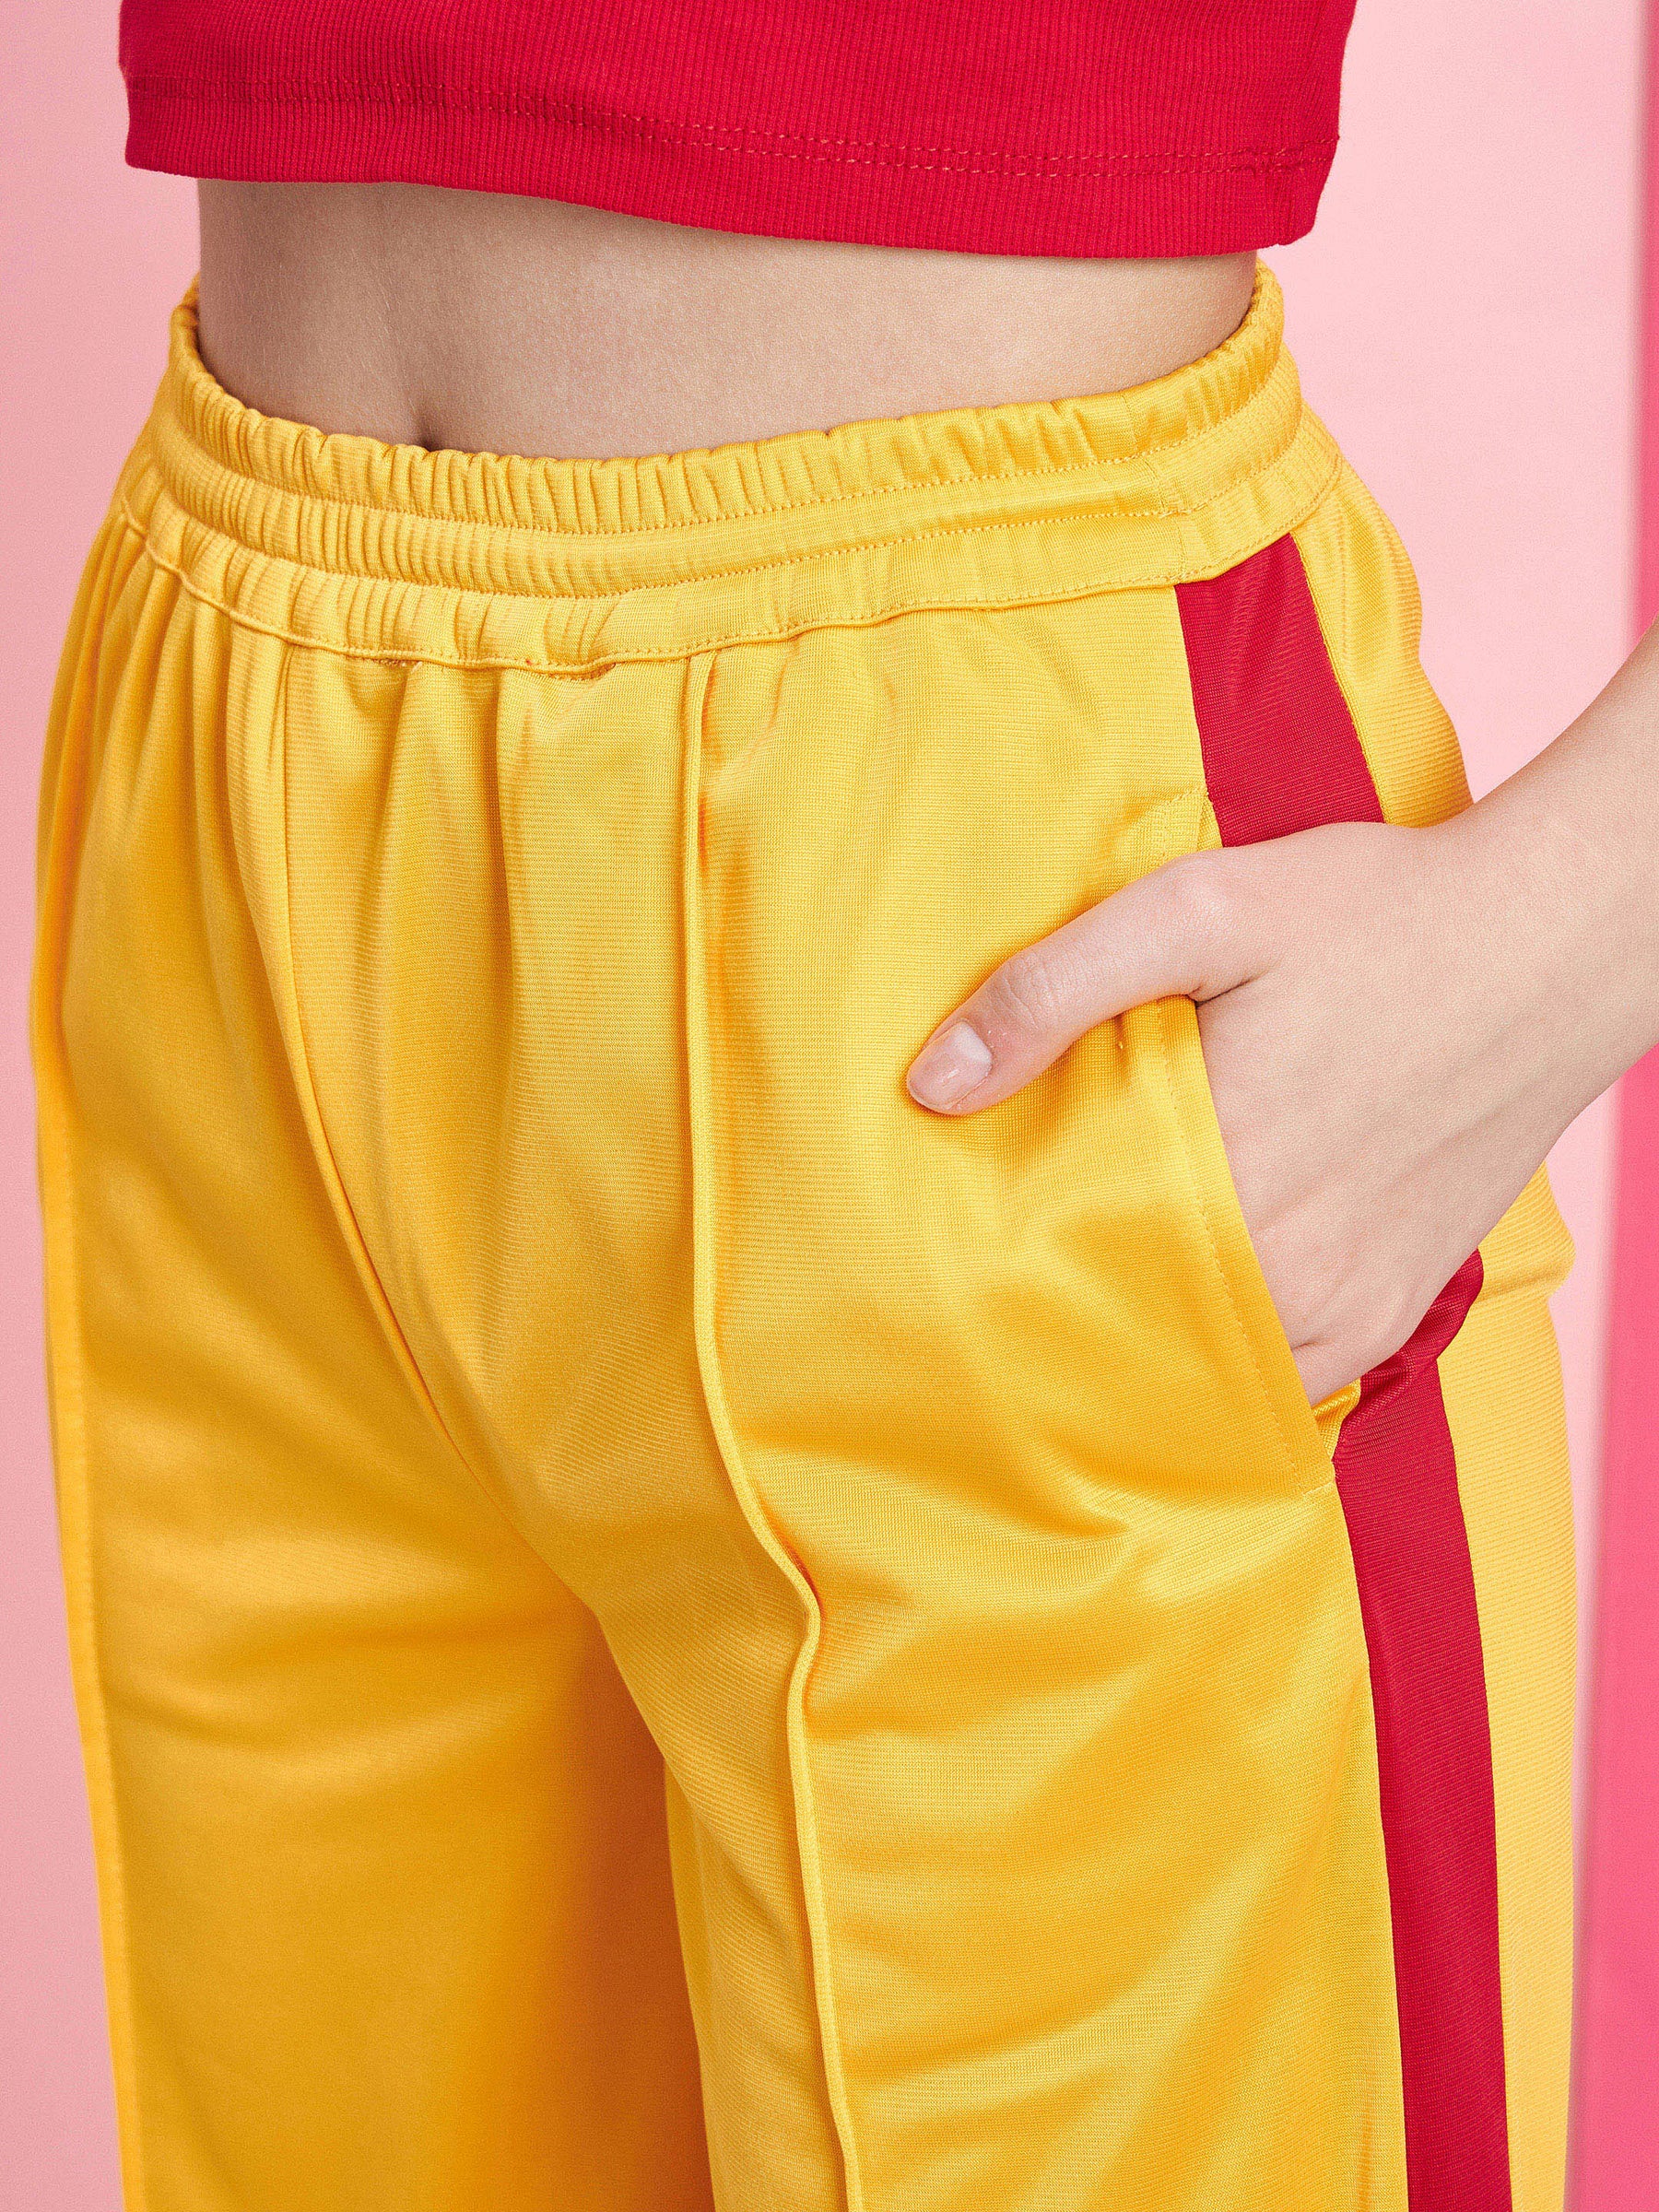 Women Red Rib Crop Top With Yellow Side Button Track Pants